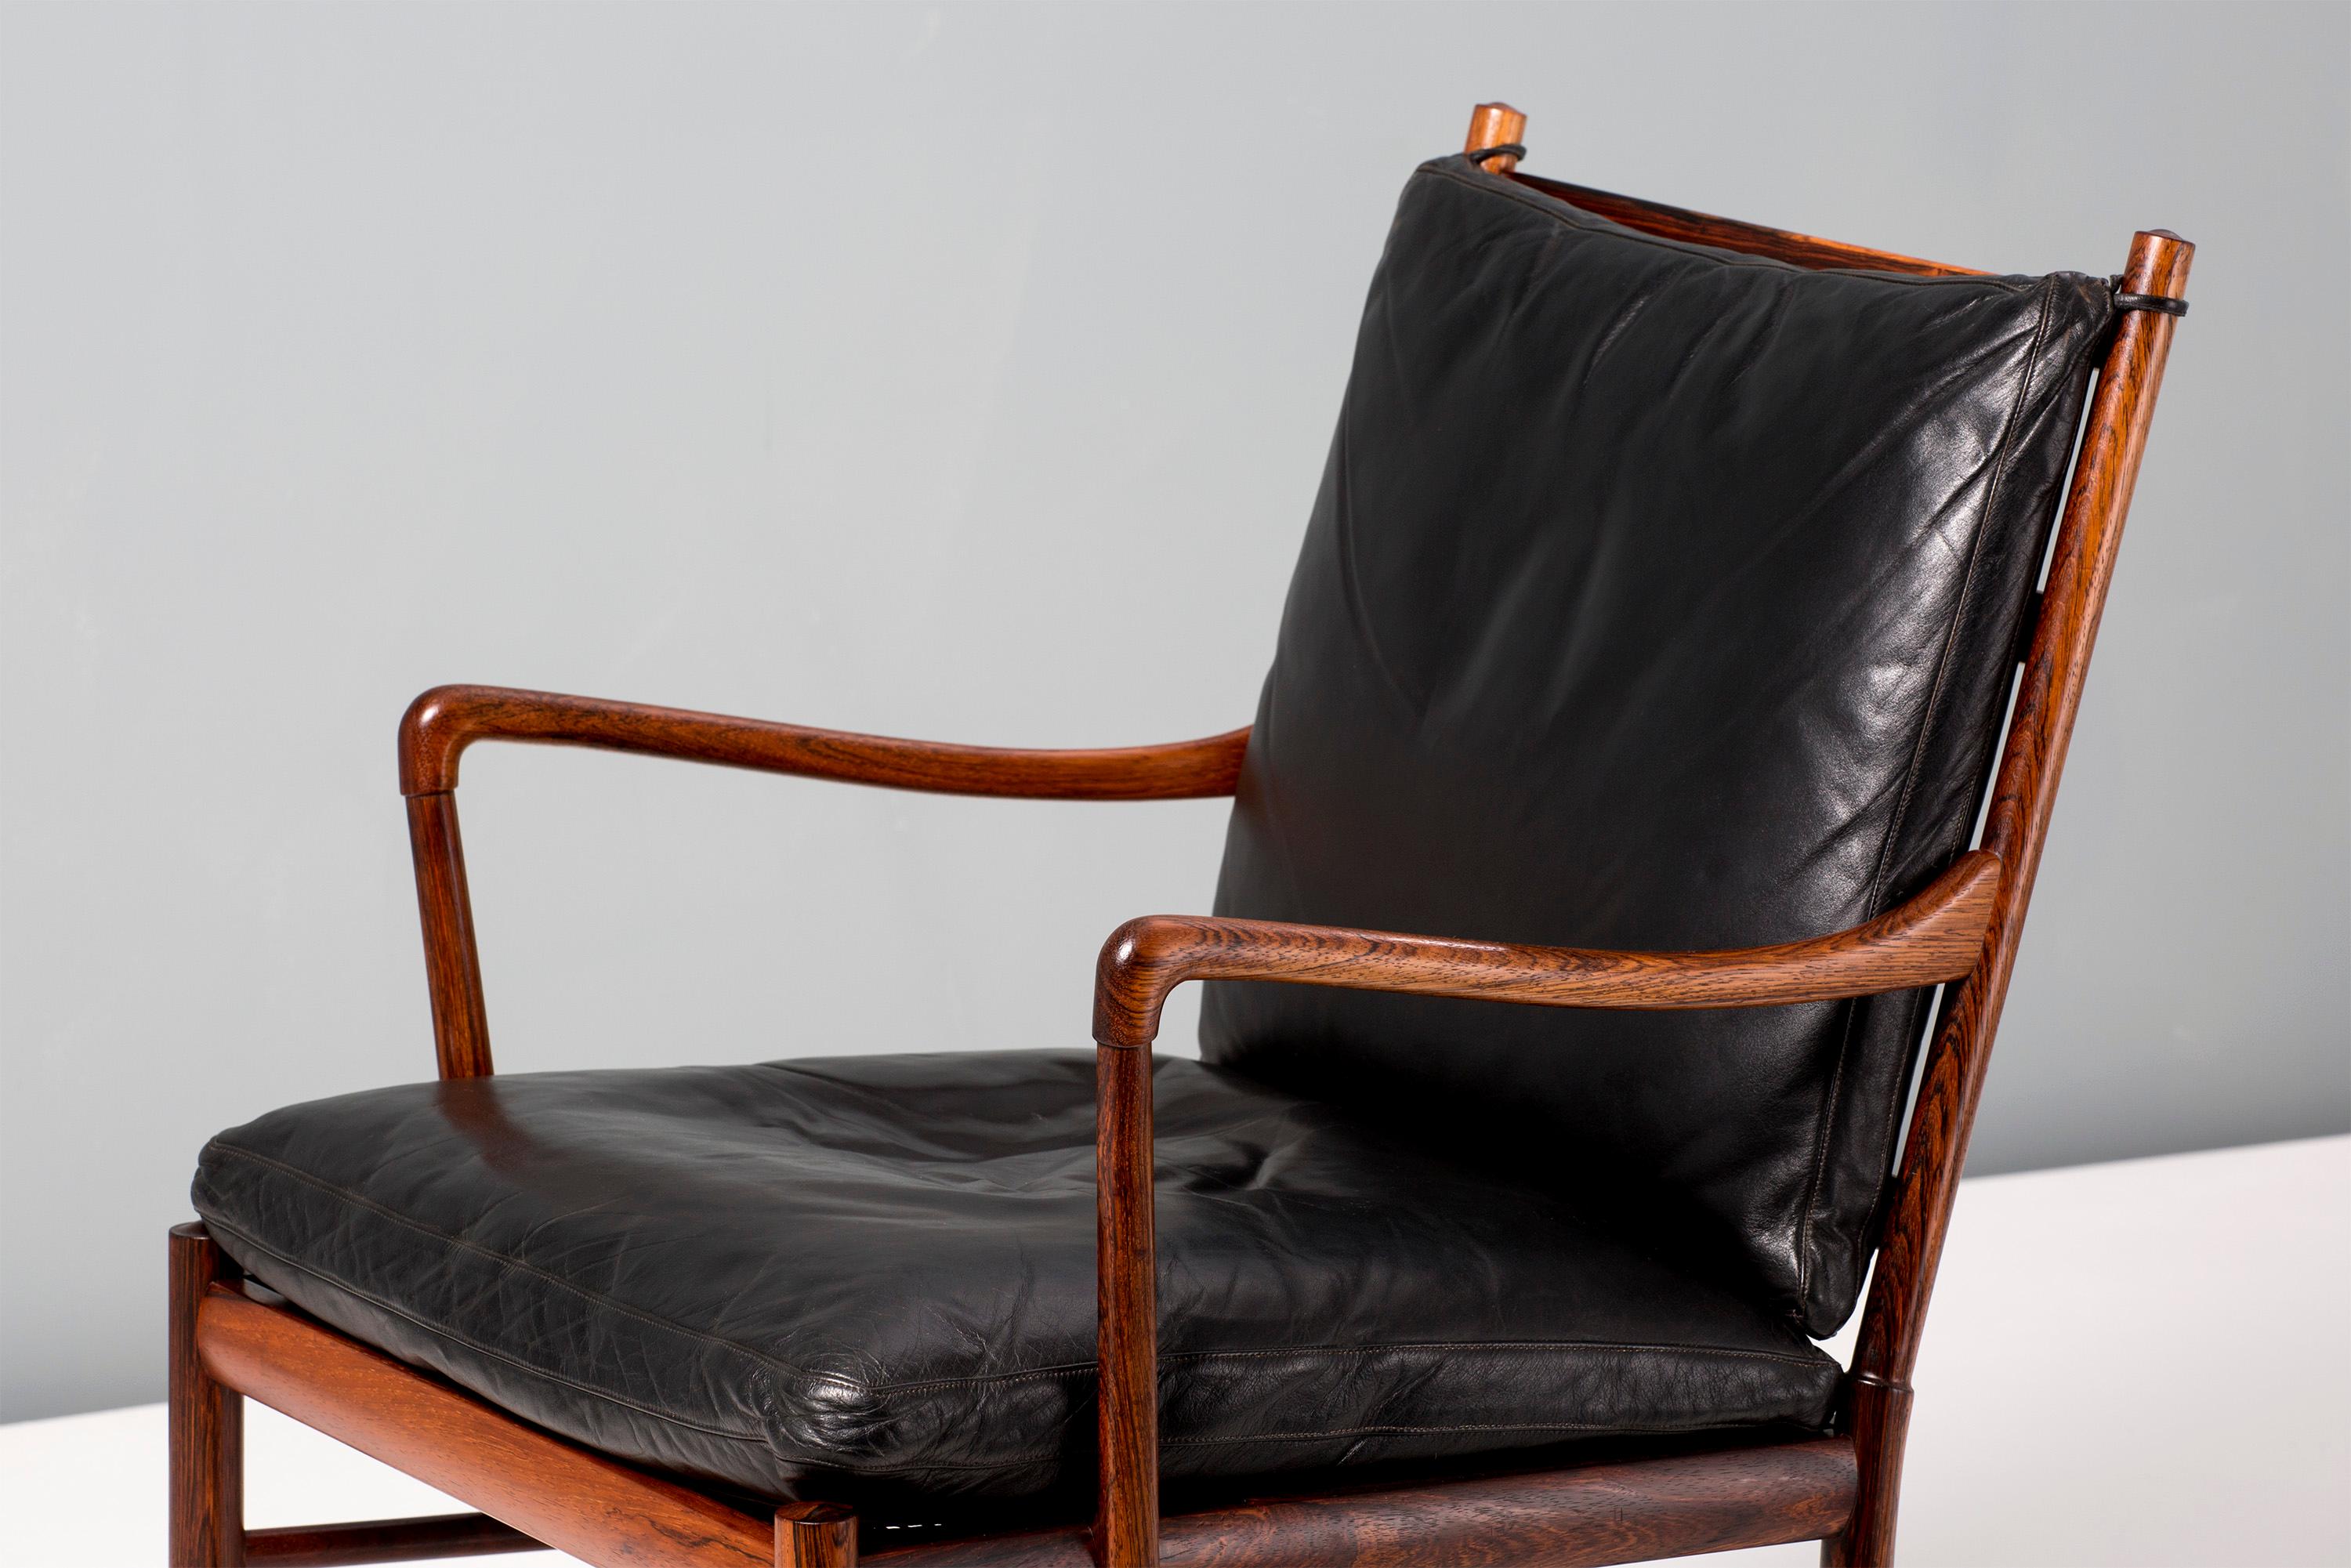 Danish Ole Wanscher Vintage Rosewood Colonial Chair and Ottoman, 1950s